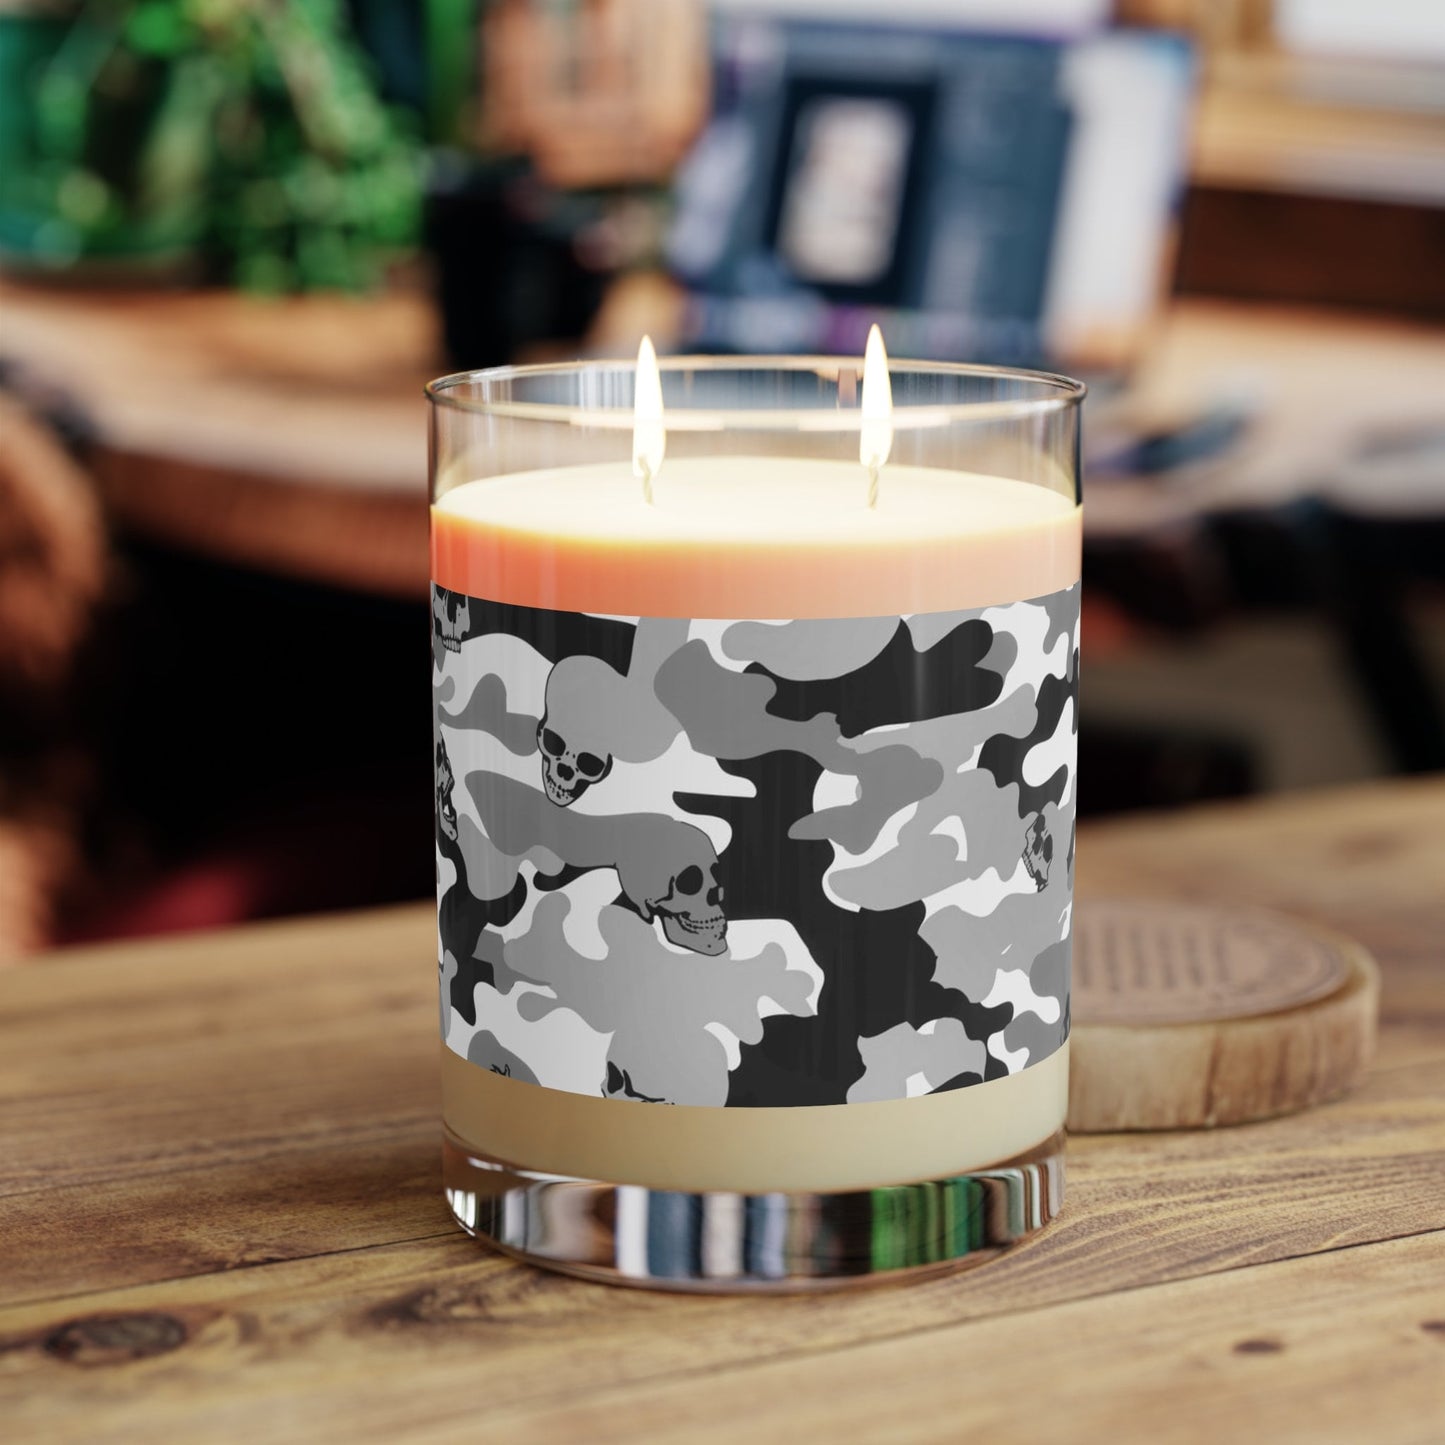 Camouflage Scented Candle - Full Glass, 11oz Sugar Skull Pattern Candle Gift